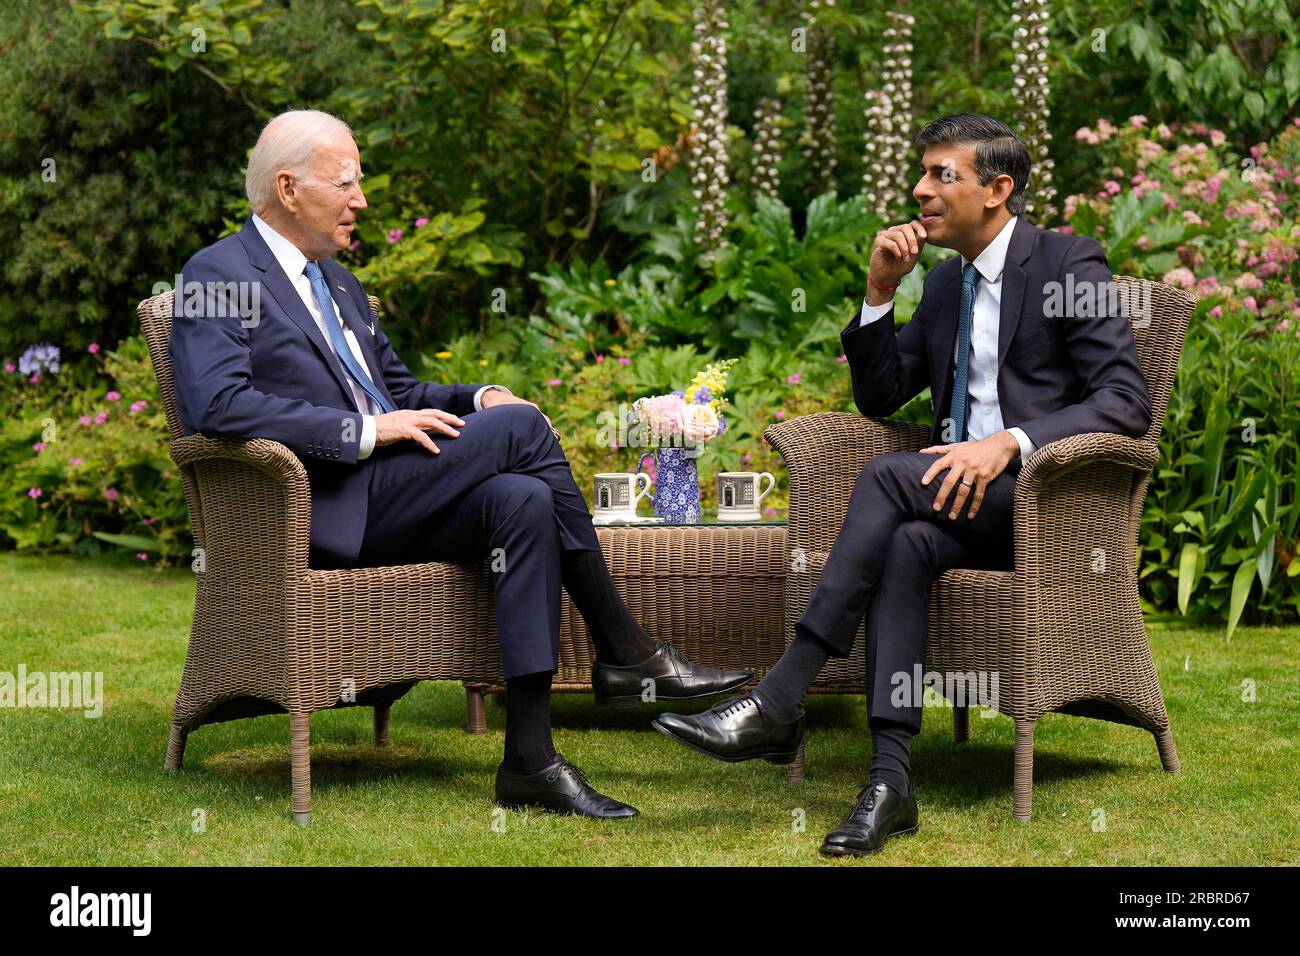 London, United Kingdom. 10th July, 2023. U.S President Joe Biden, left, during a one-on-one bilateral meeting over tea with British Prime Minister Rishi Sunak, in the garden at 10 Downing Street, July 10, 2023 in London, England. Biden is the United Kingdom prior to attending the NATO Summit in Lithuania. Credit: Adam Schultz/White House Photo/Alamy Live News Stock Photo